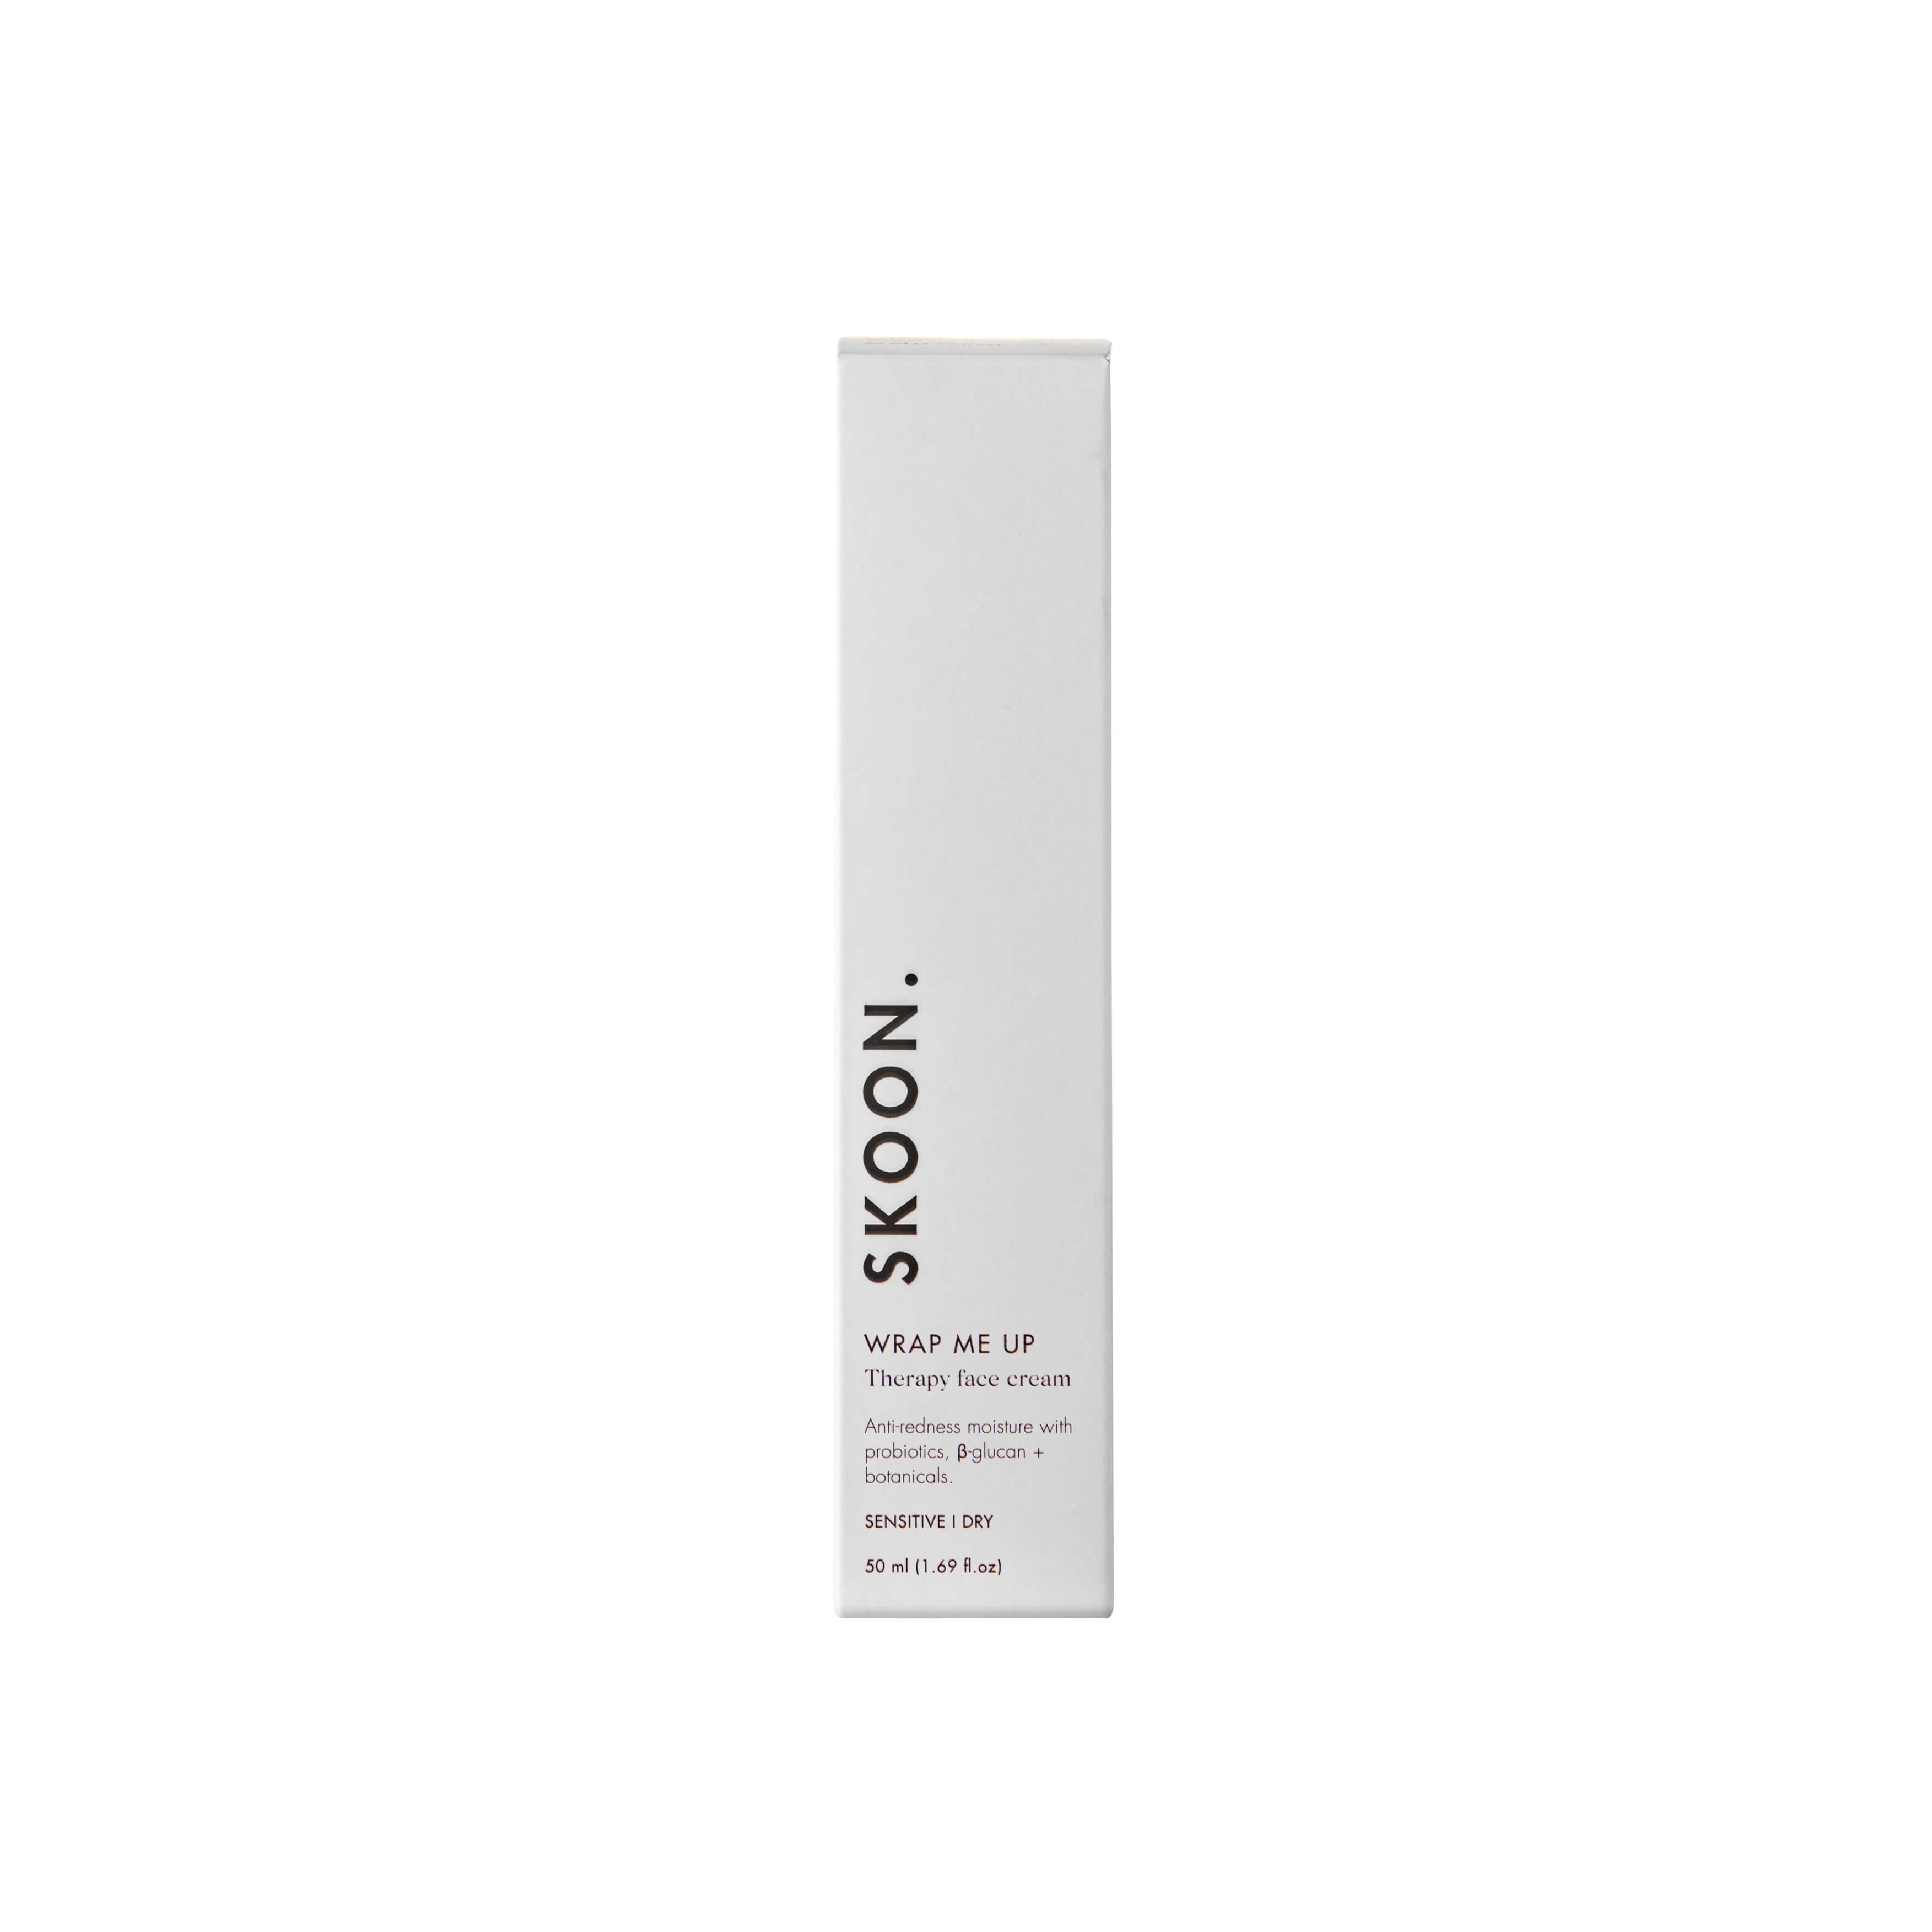 SKOON. WRAP ME UP sensitive therapy face cream